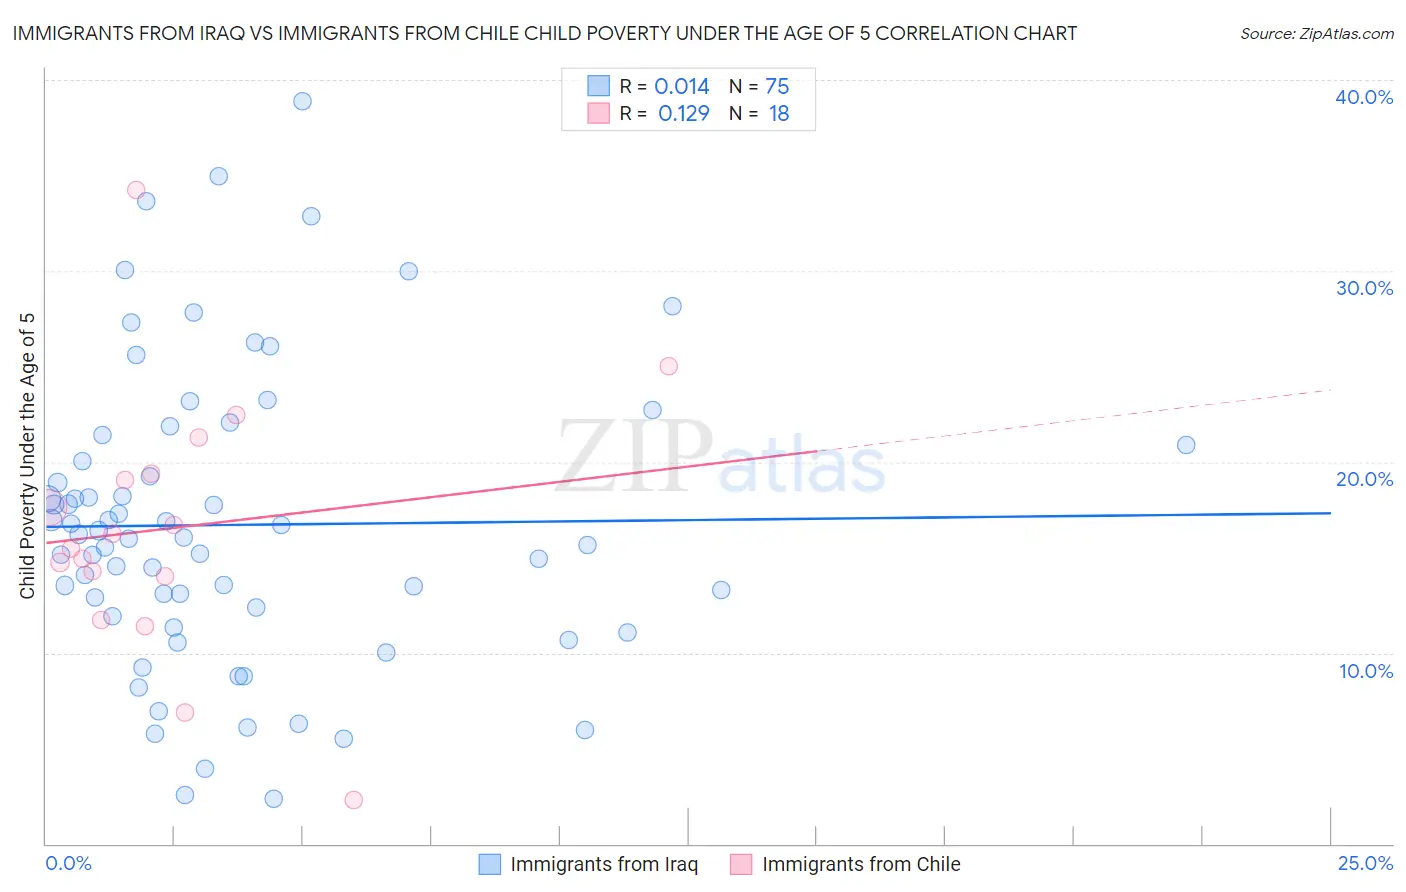 Immigrants from Iraq vs Immigrants from Chile Child Poverty Under the Age of 5